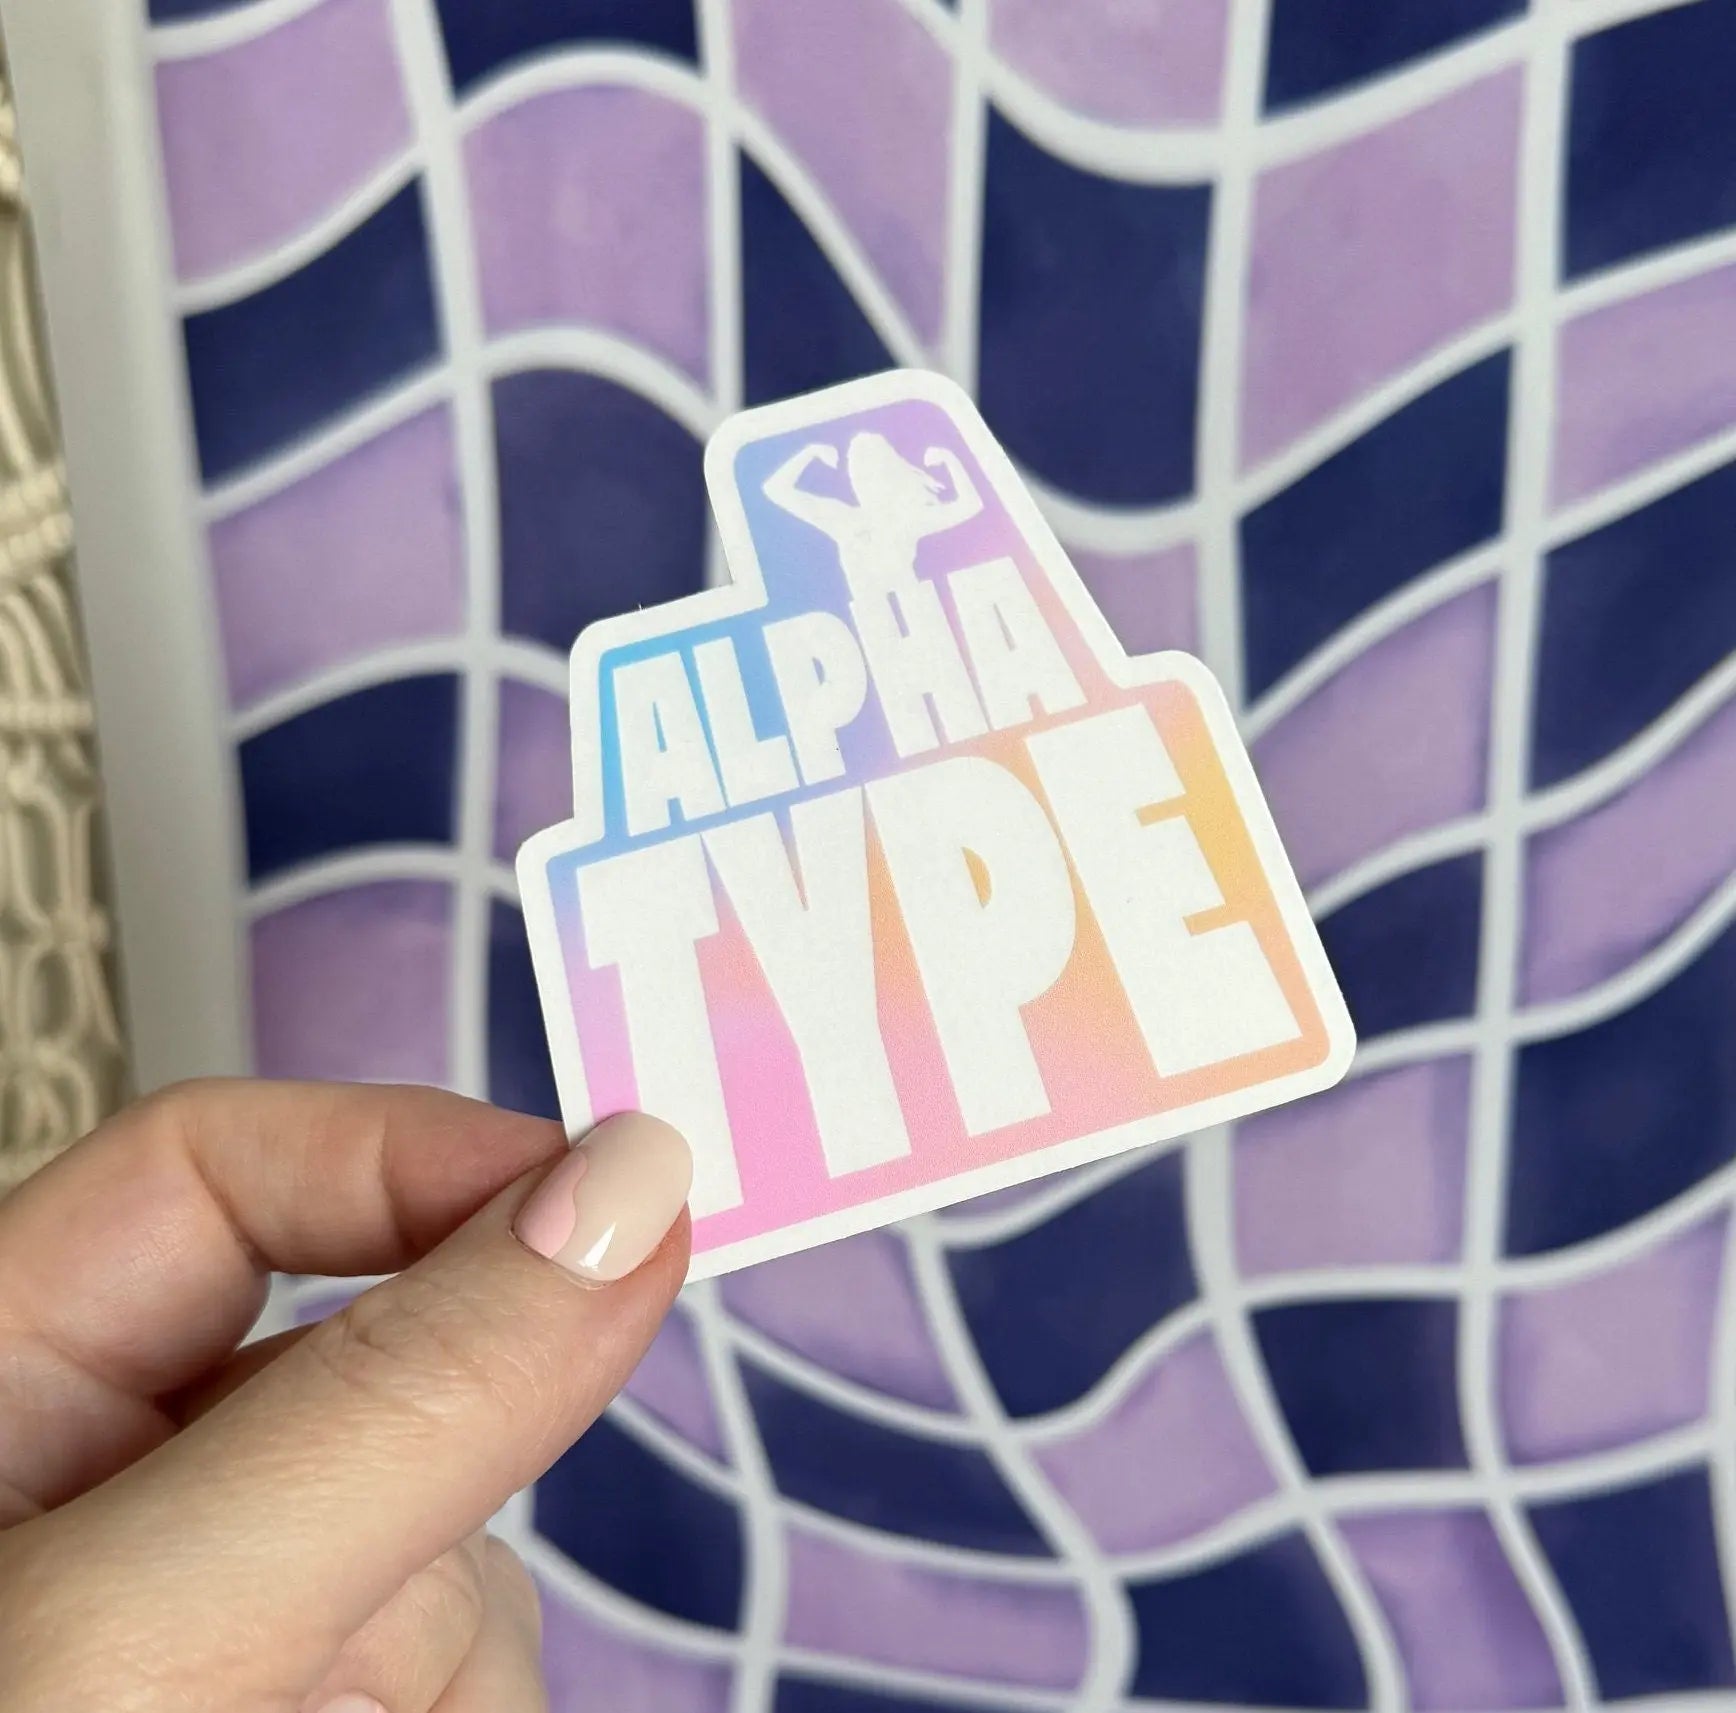 CLEAR Alpha Type sticker MangoIllustrated